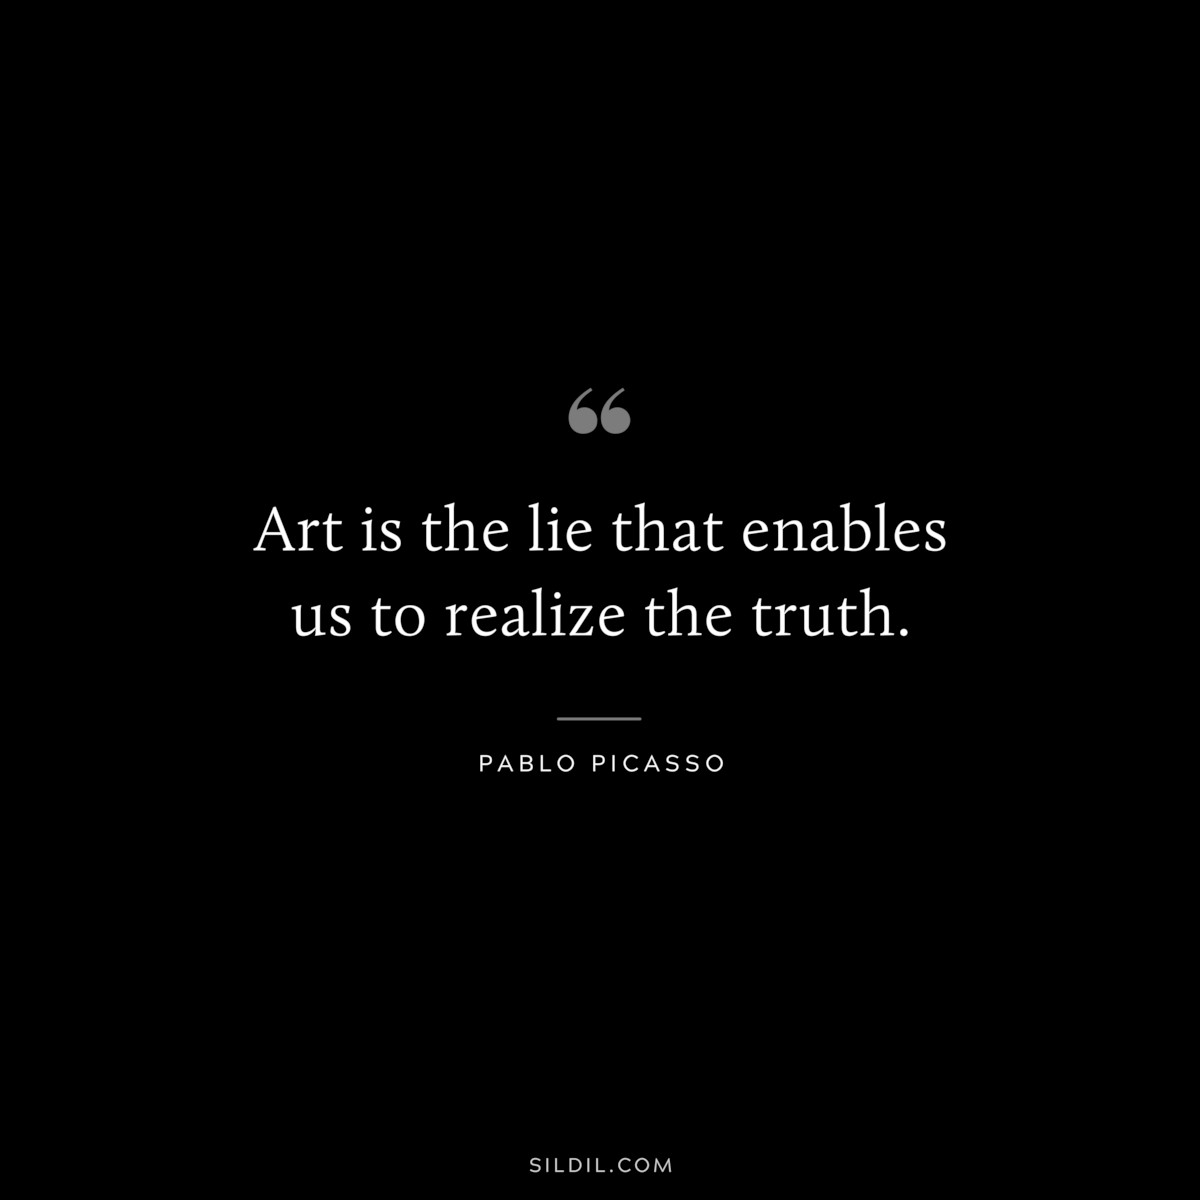 Art is the lie that enables us to realize the truth. ― Pablo Picasso